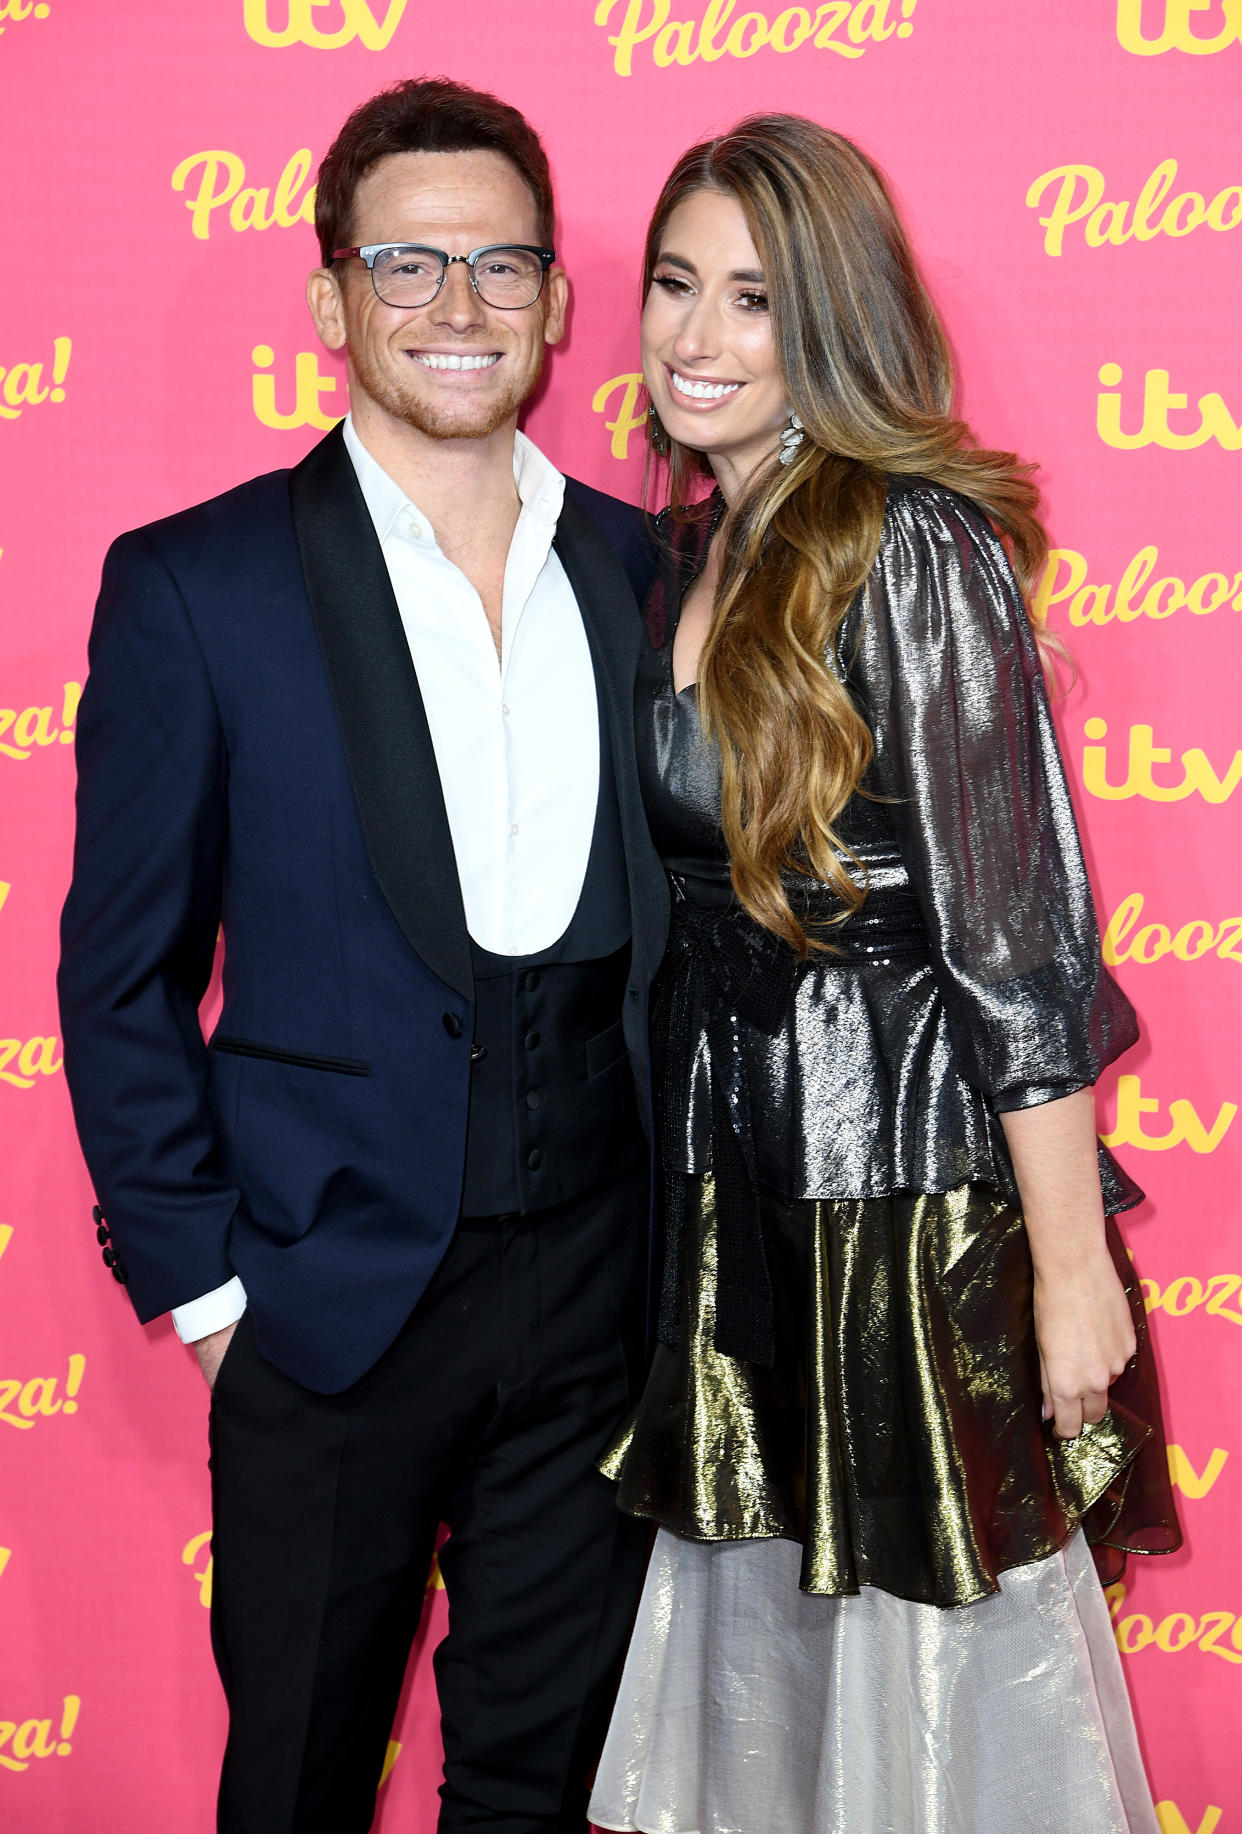 Joe Swash (left) and Stacey Solomon (right) attending the ITV Palooza held at the Royal Festival Hall, Southbank Centre, London.